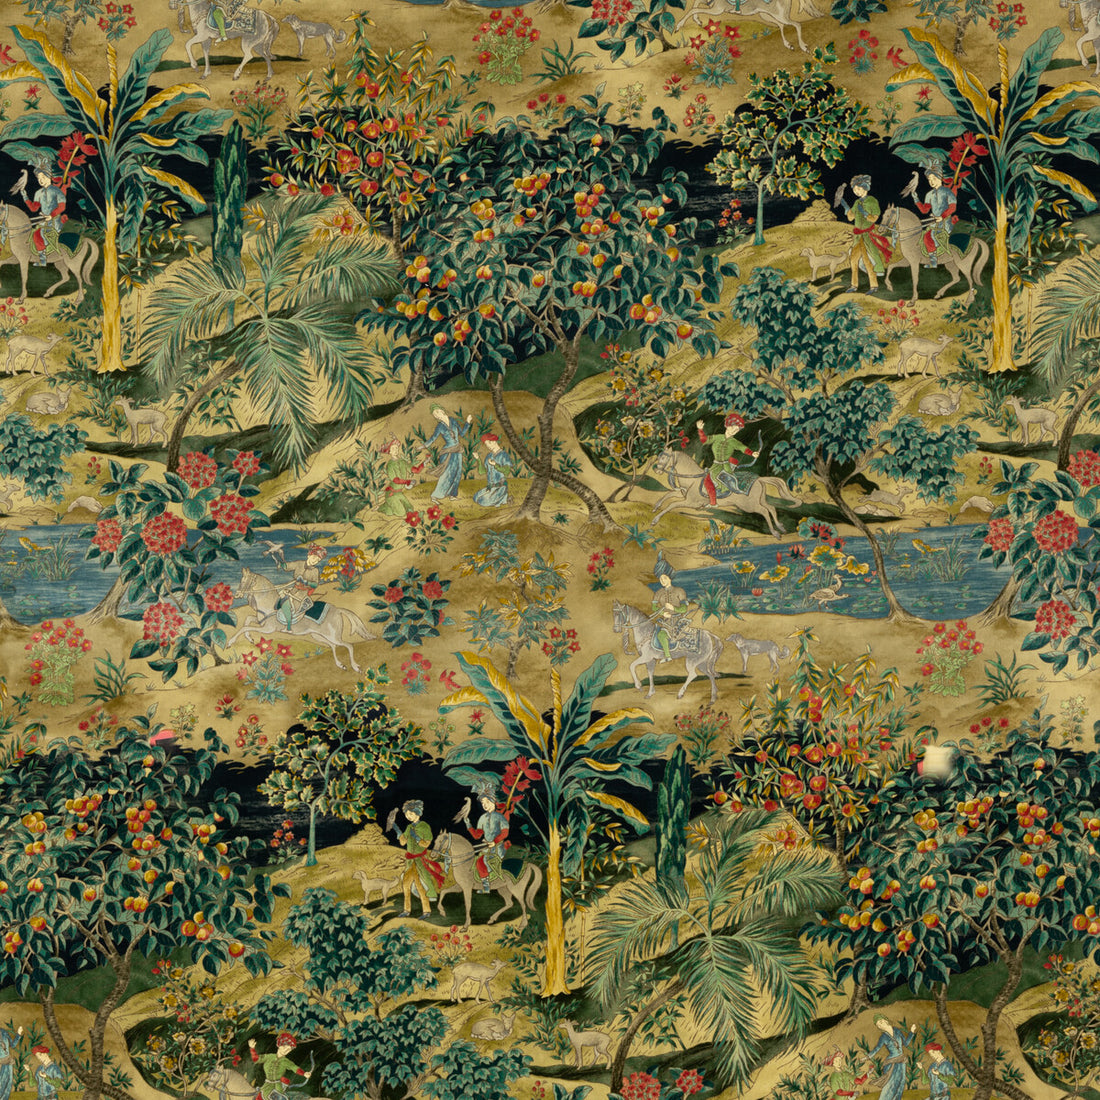 Ramayana Velvet fabric in emerald/sand color - pattern BP10832.2.0 - by G P &amp; J Baker in the Coromandel collection